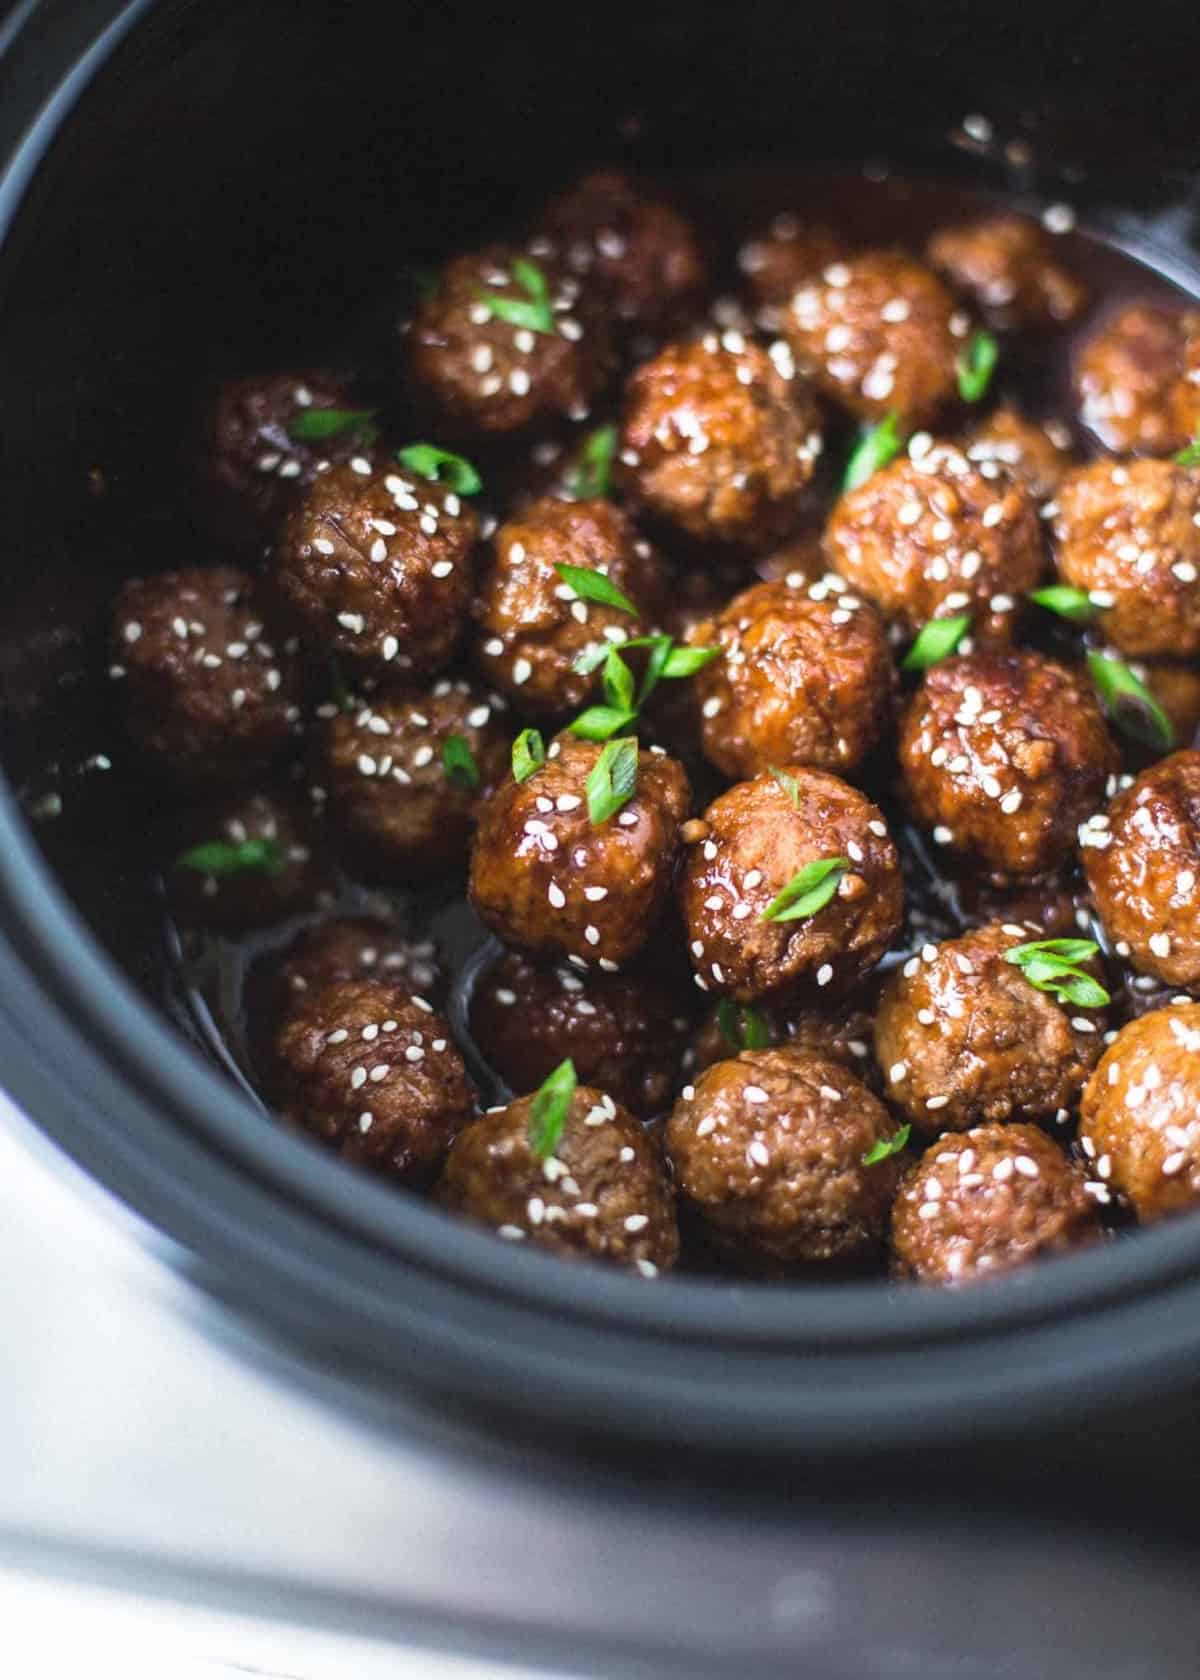 meatballs in a slow cooker